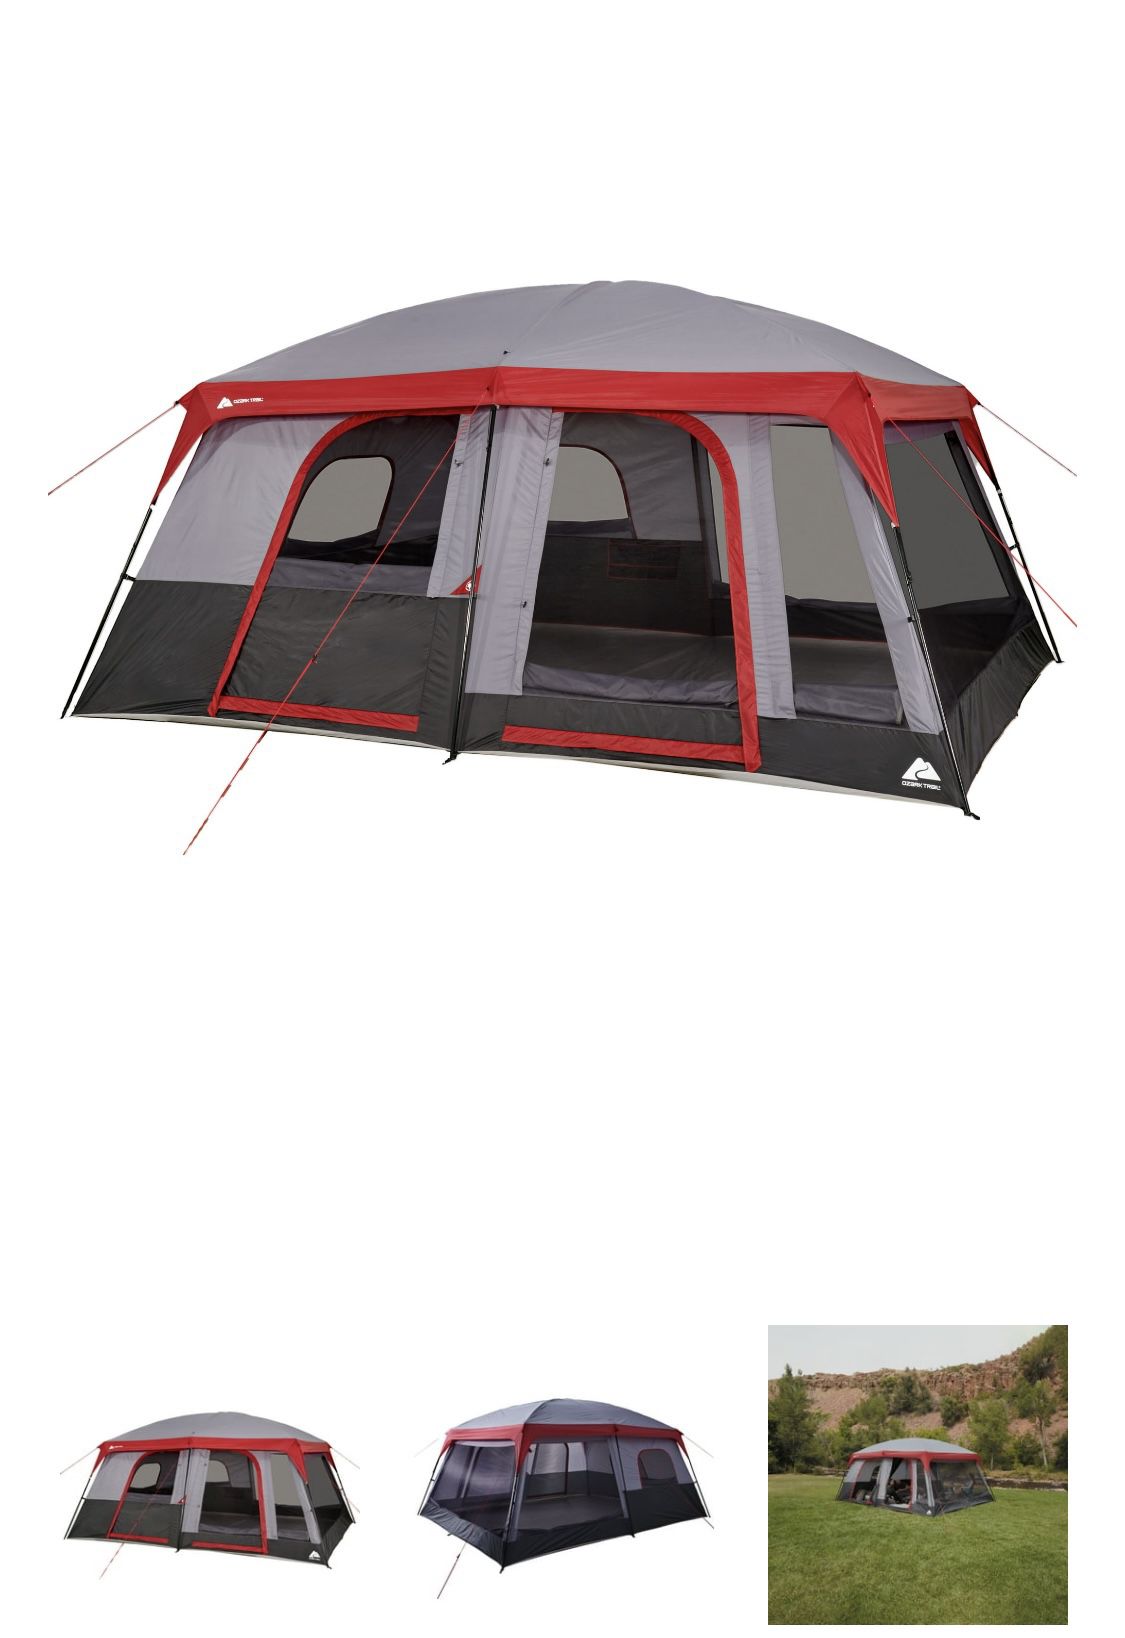 The Ozark Trail 12-Person Cabin Tent with Convertible Screen Room provides plenty of room for a large family or group camp 